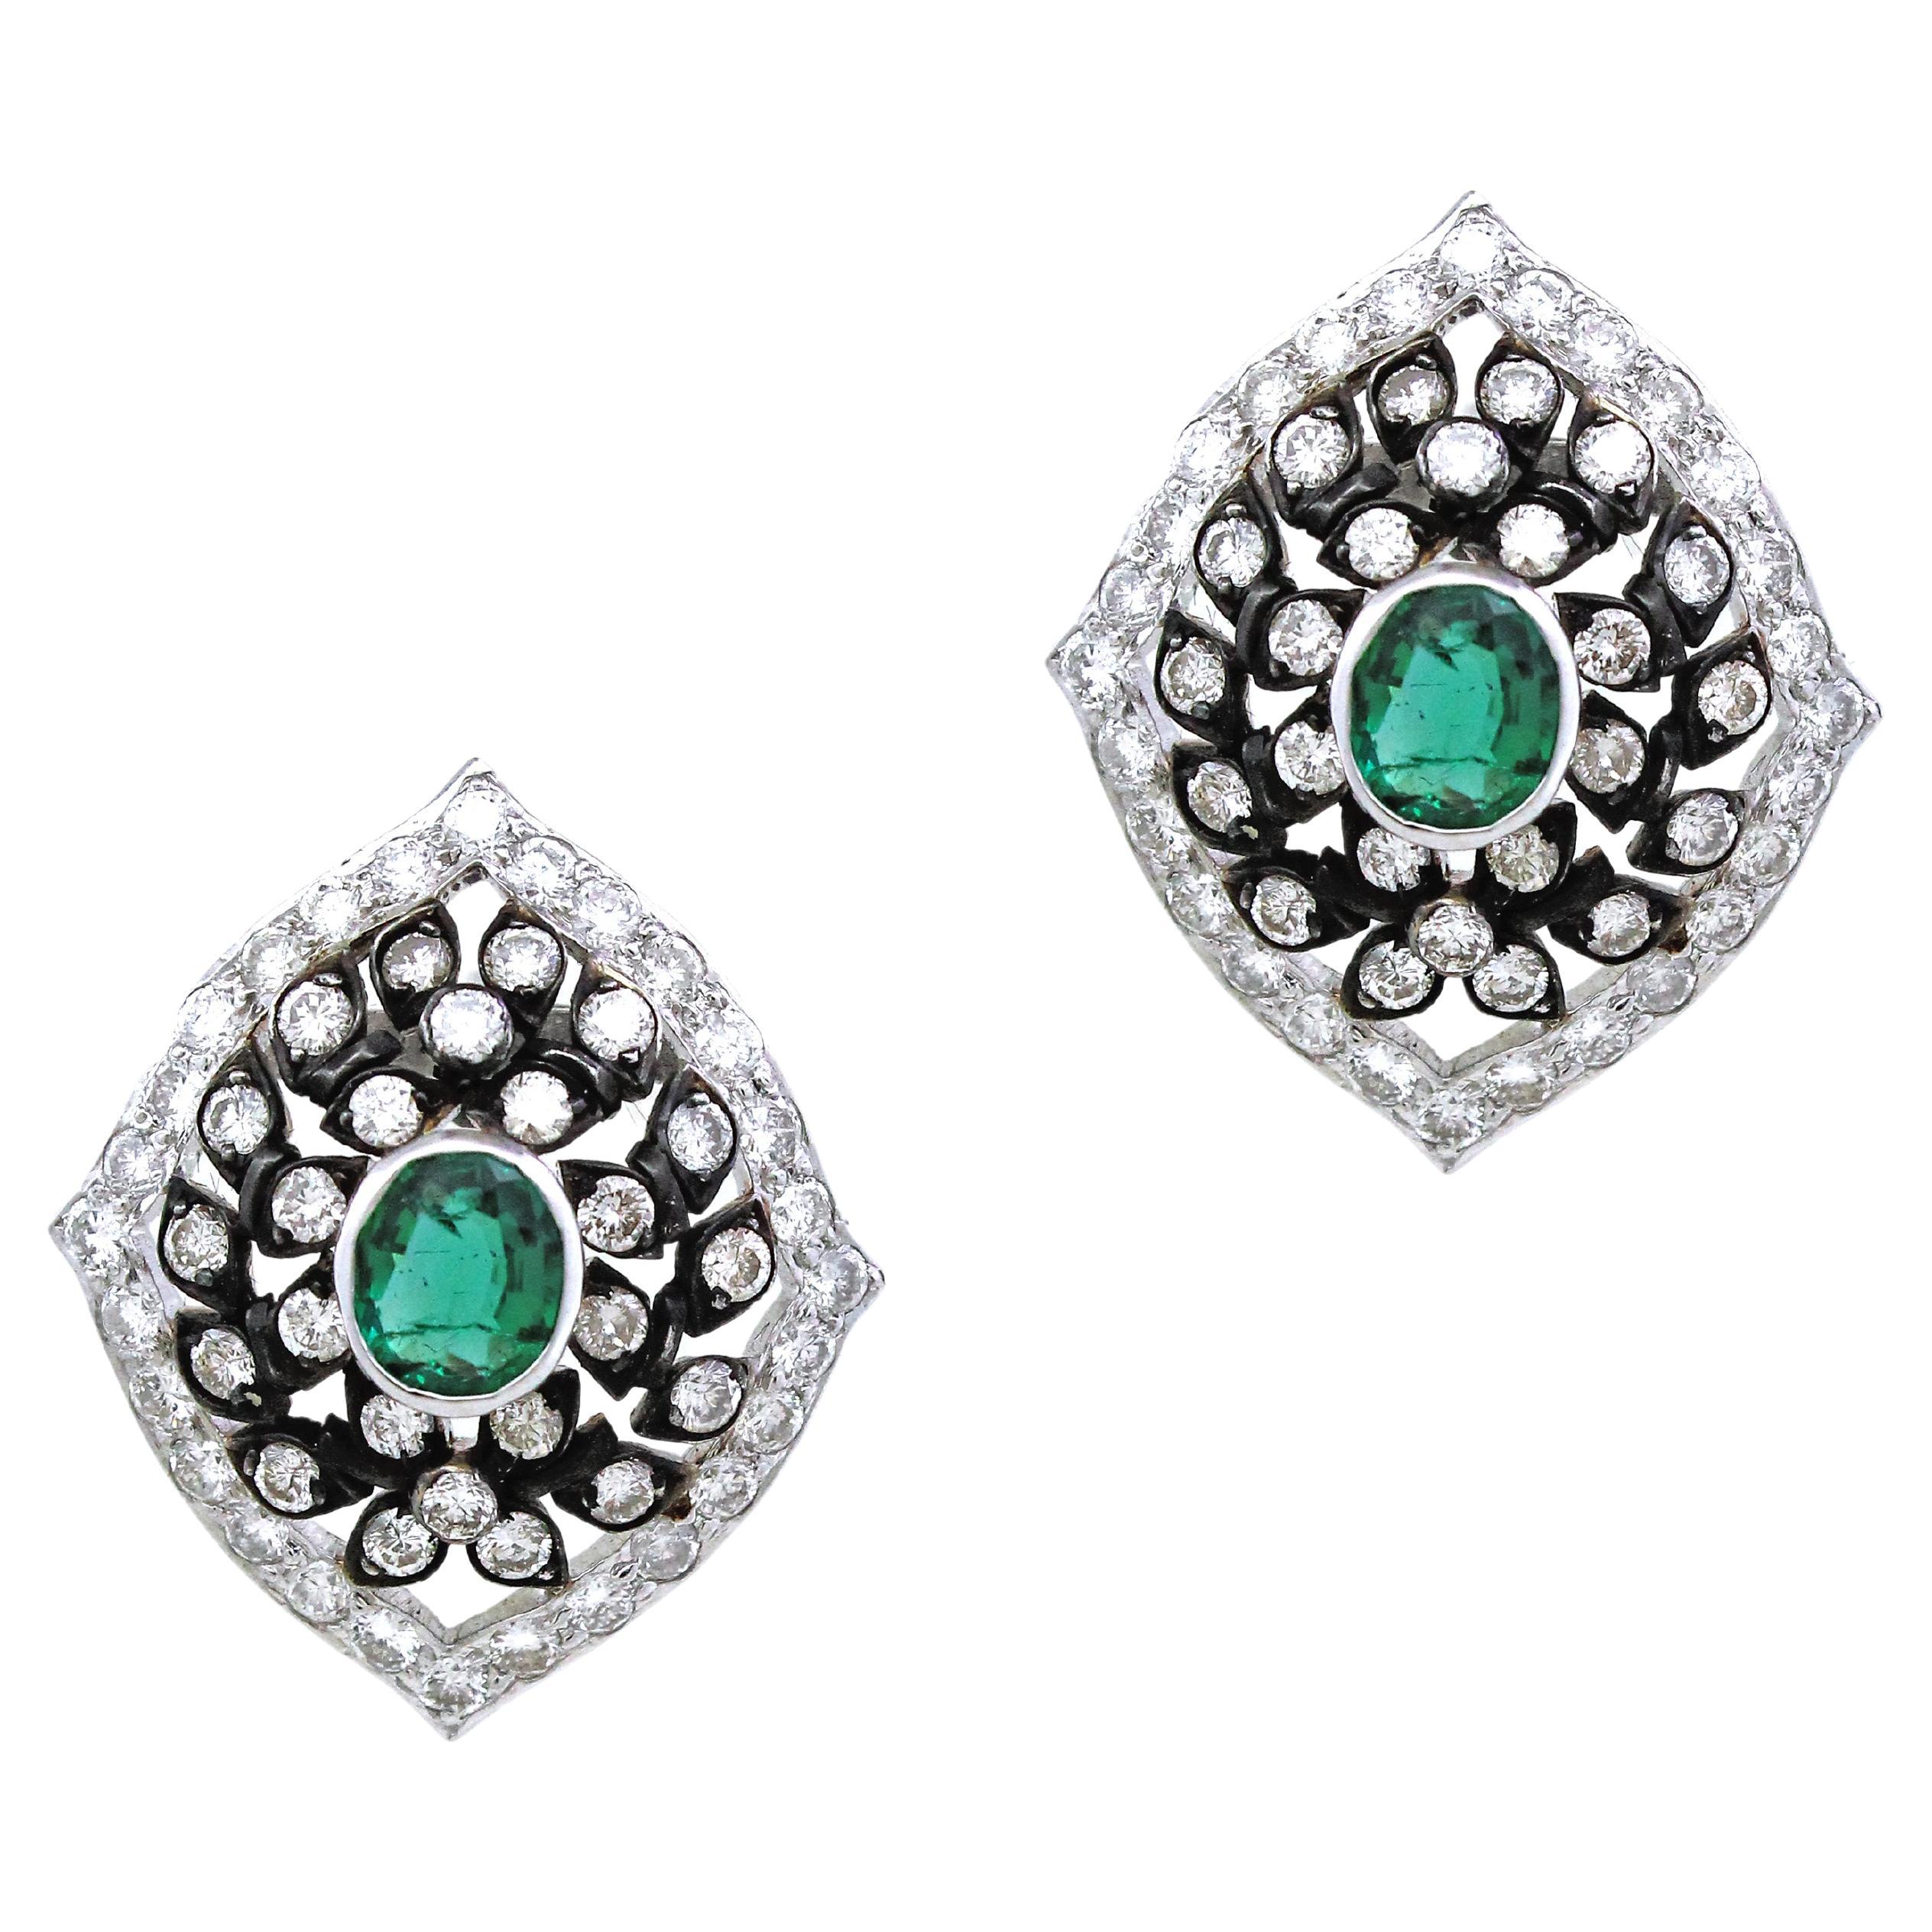 0.9 carats of emerald Earrings For Sale